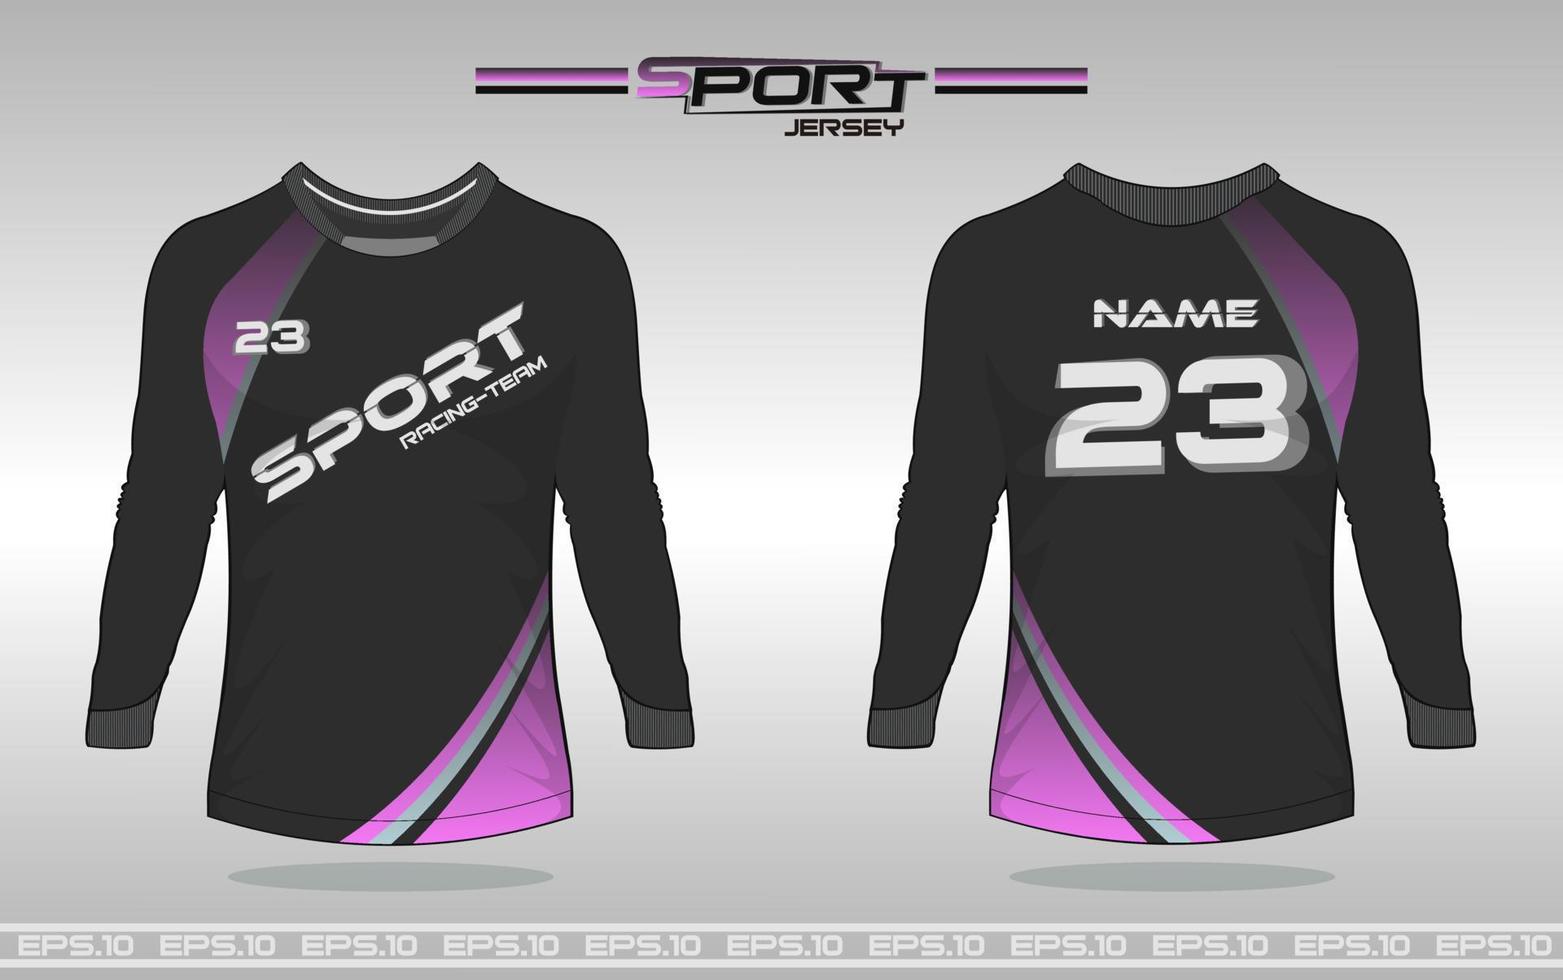 soccer jersey front and back concept long sleeve vector